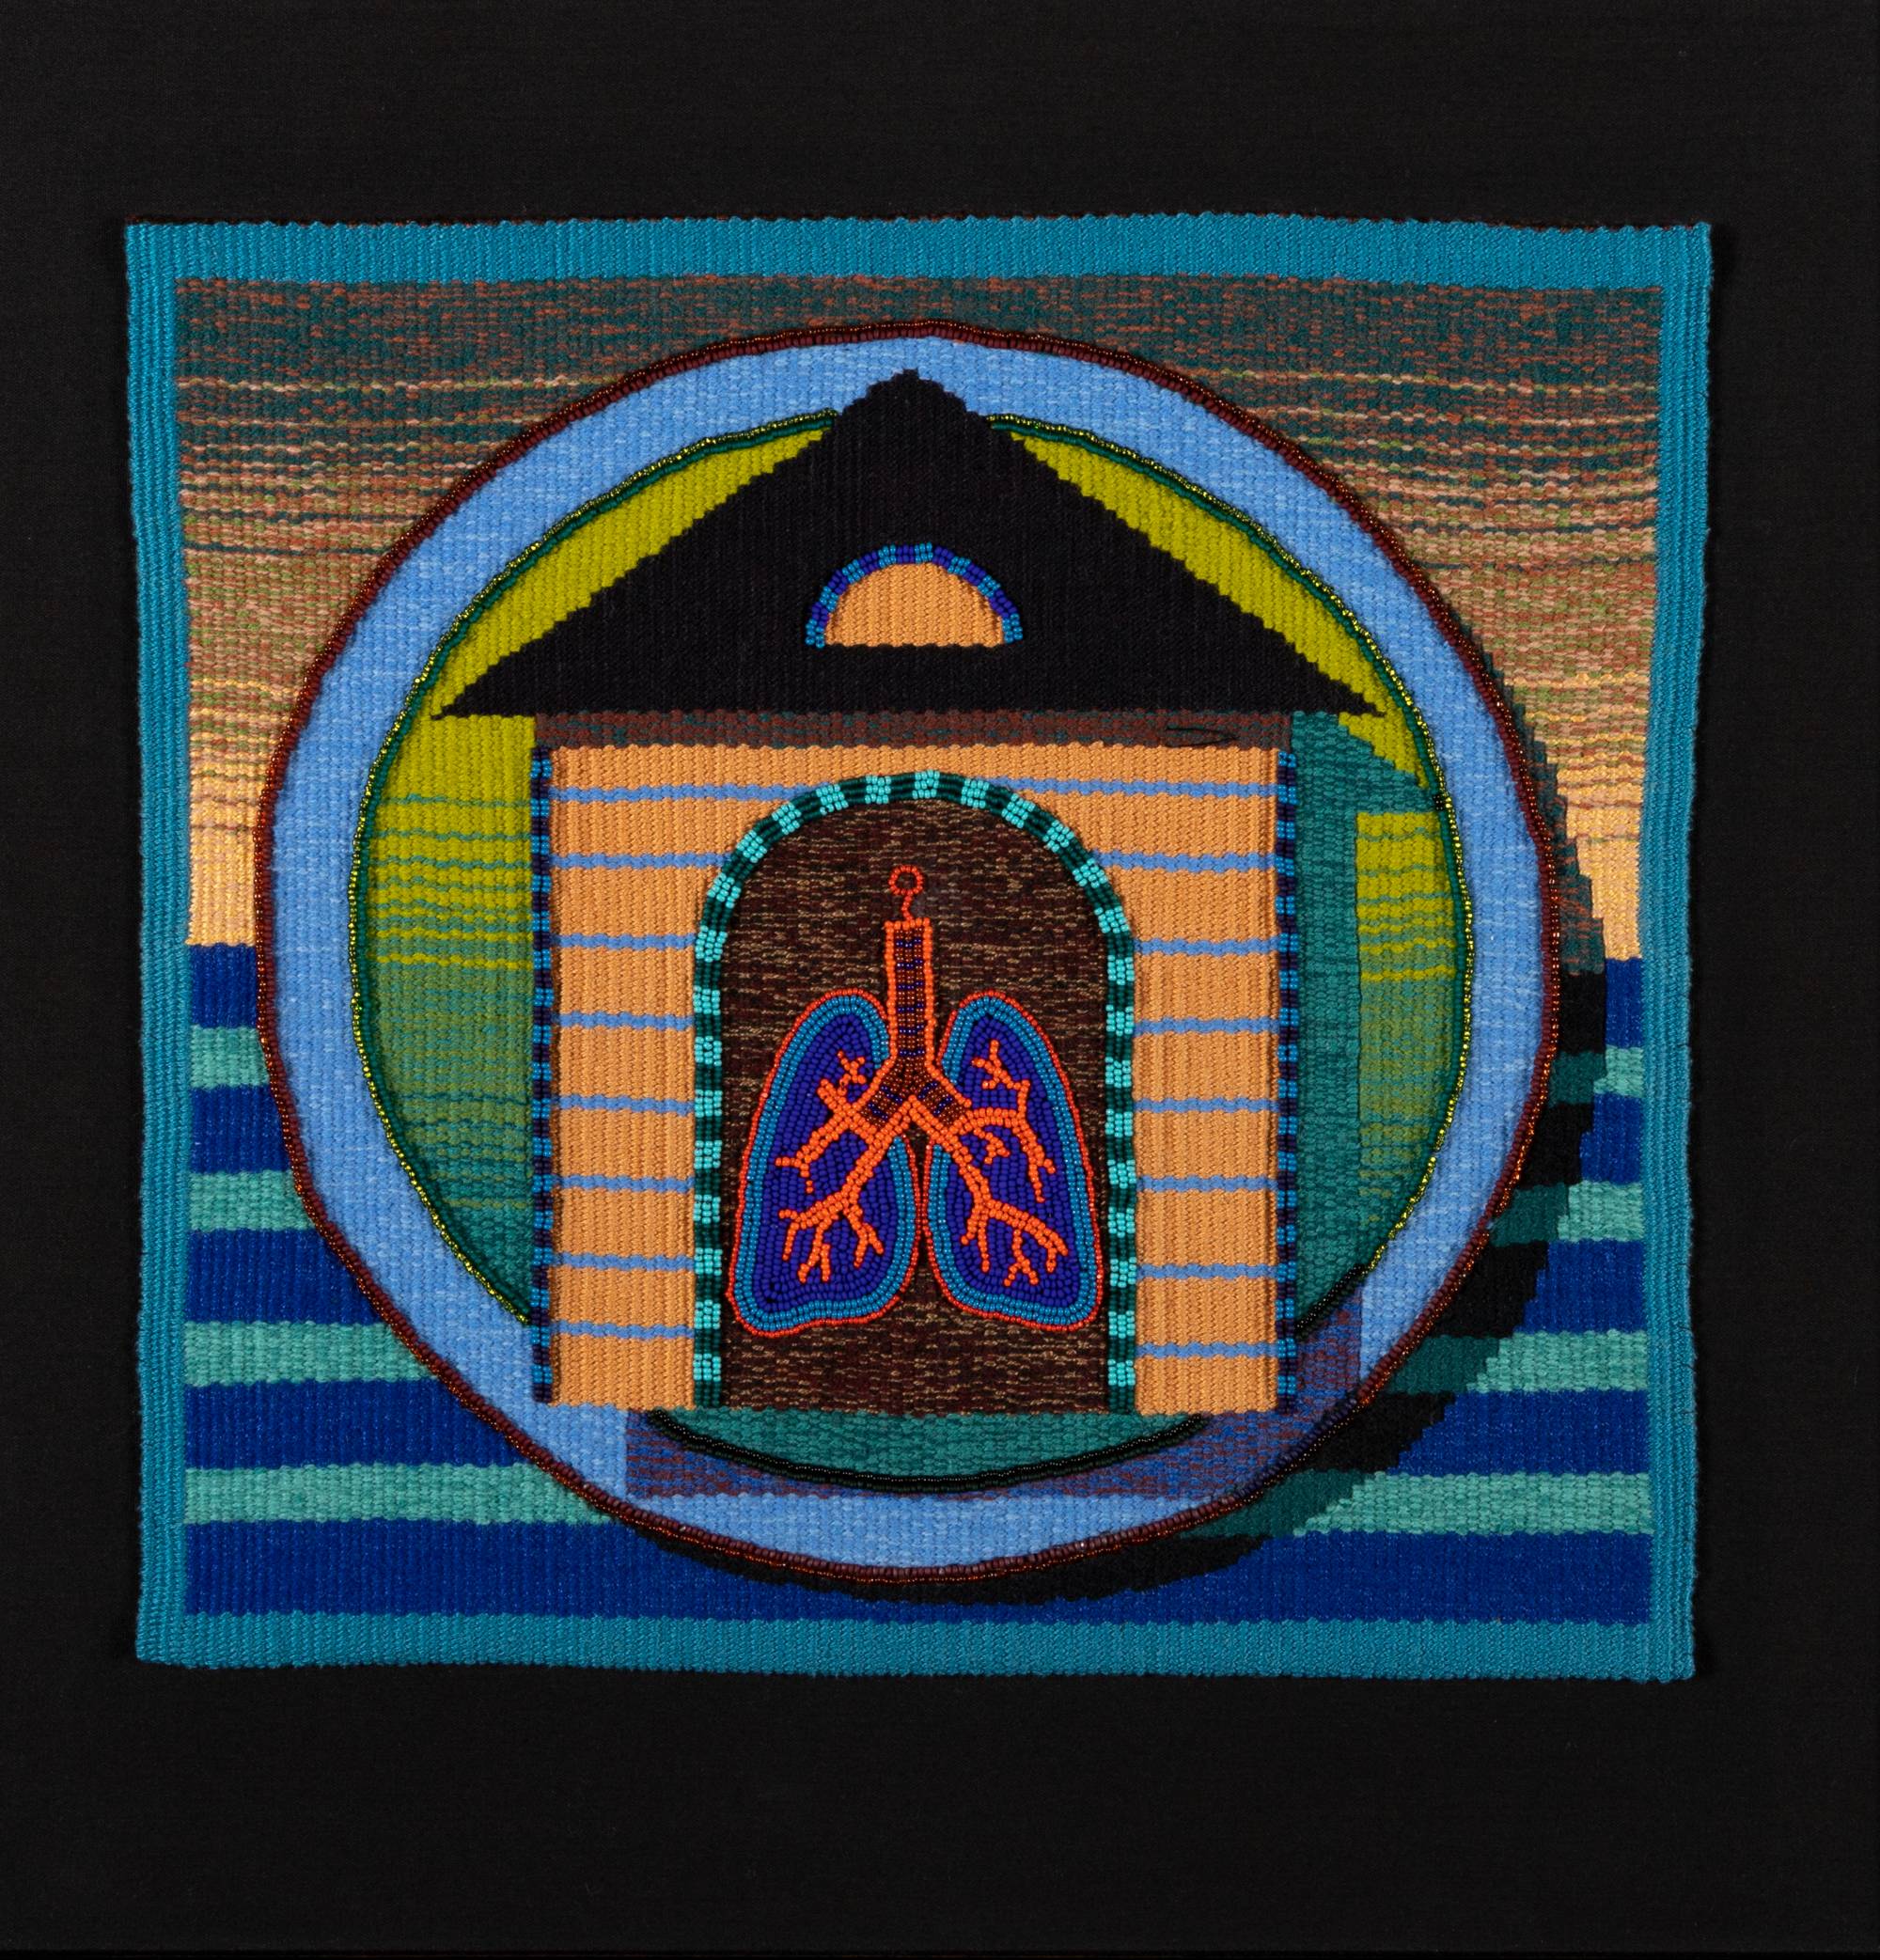 woven textile of house with lungs inside